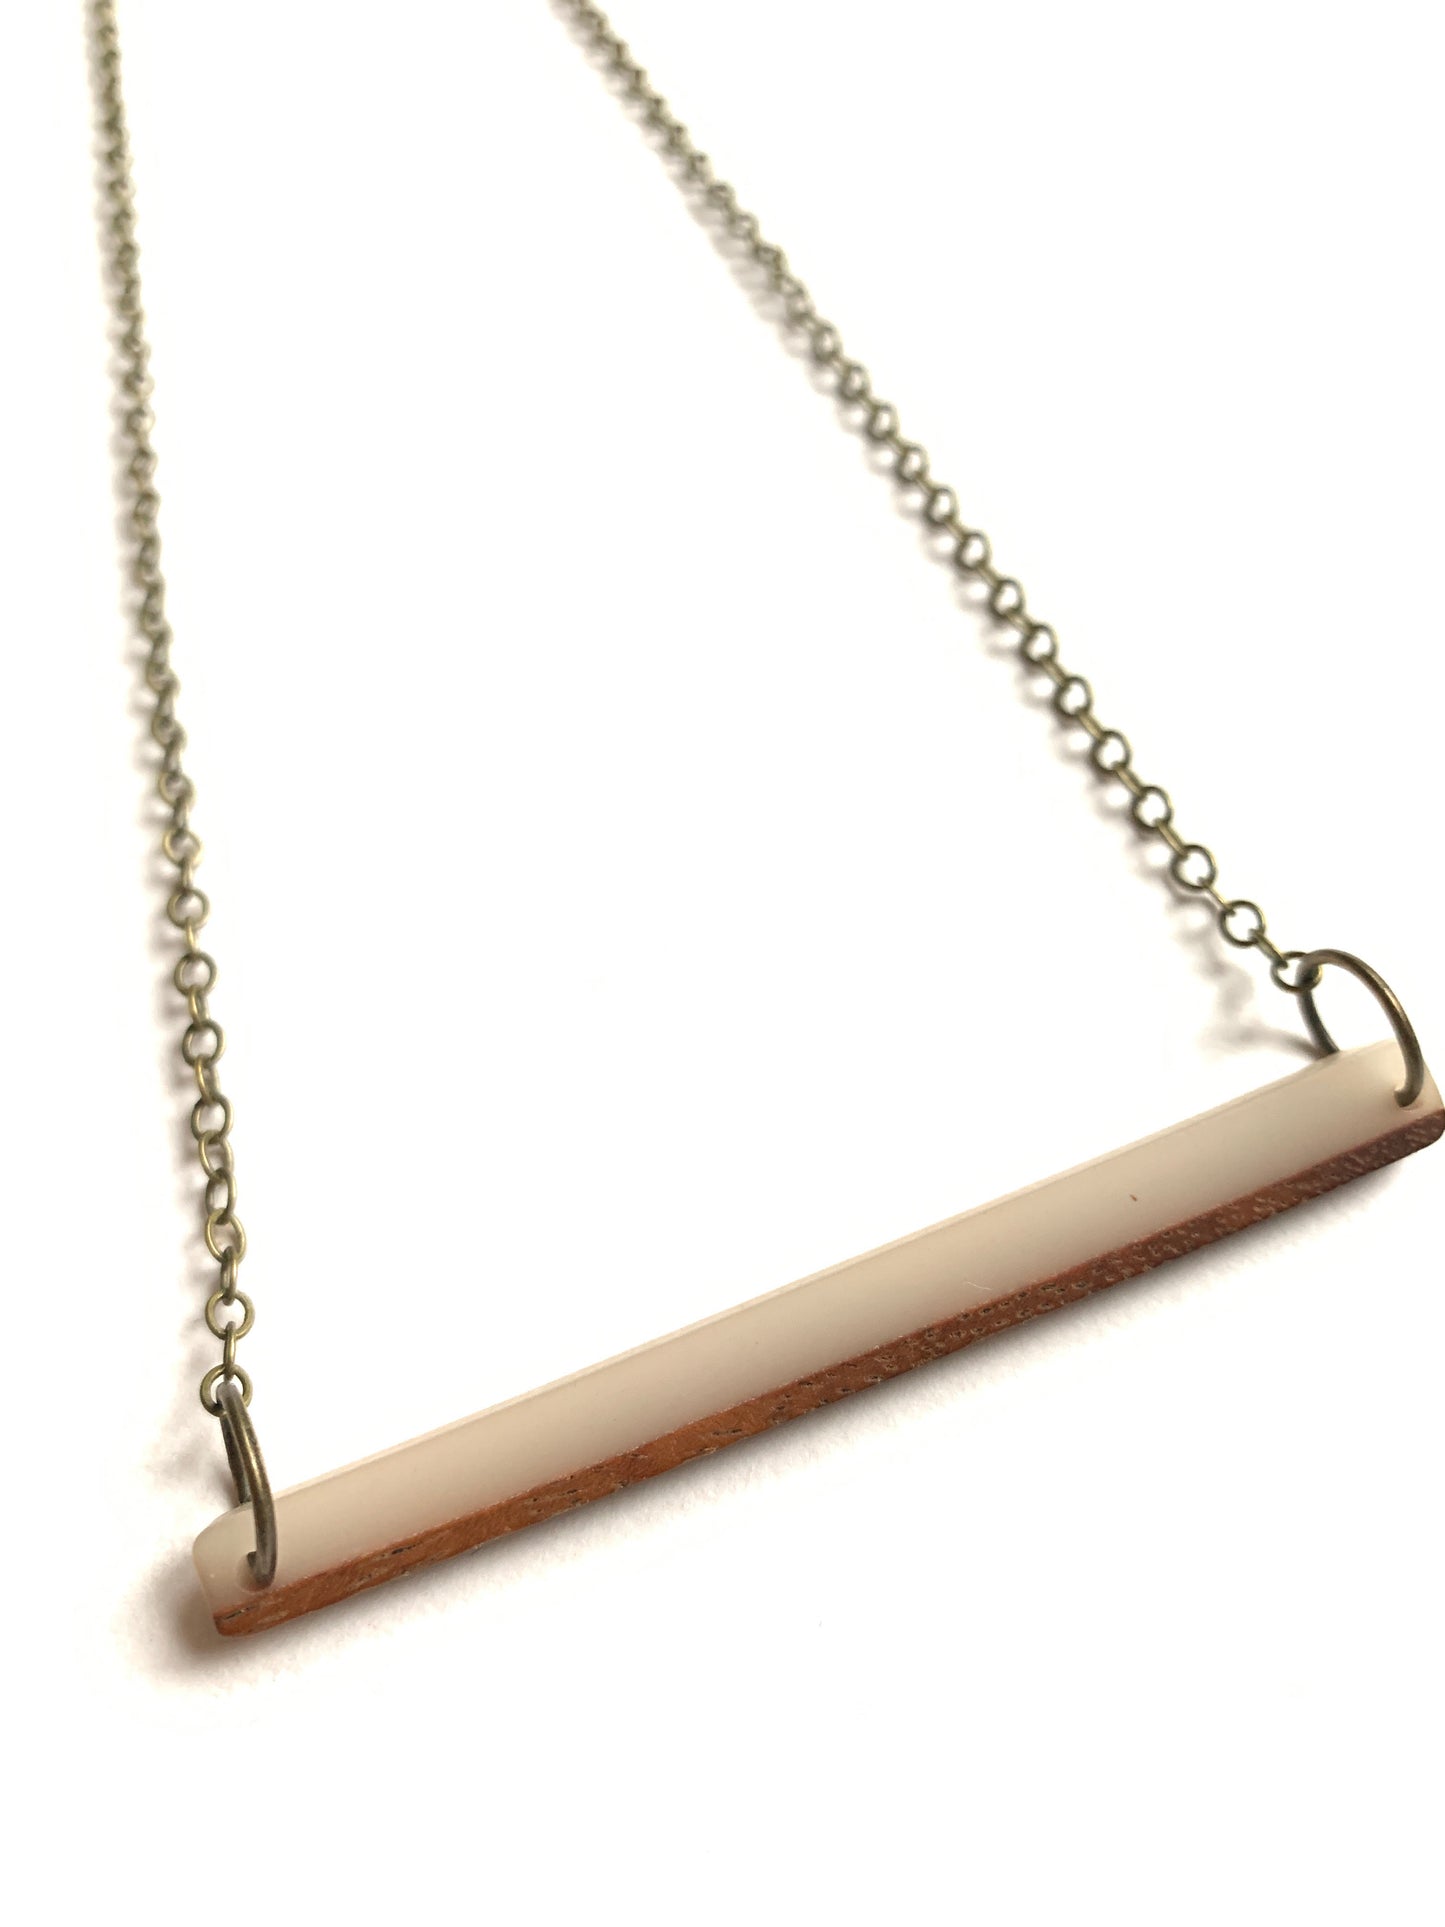 THE LONG BAR NECKLACE